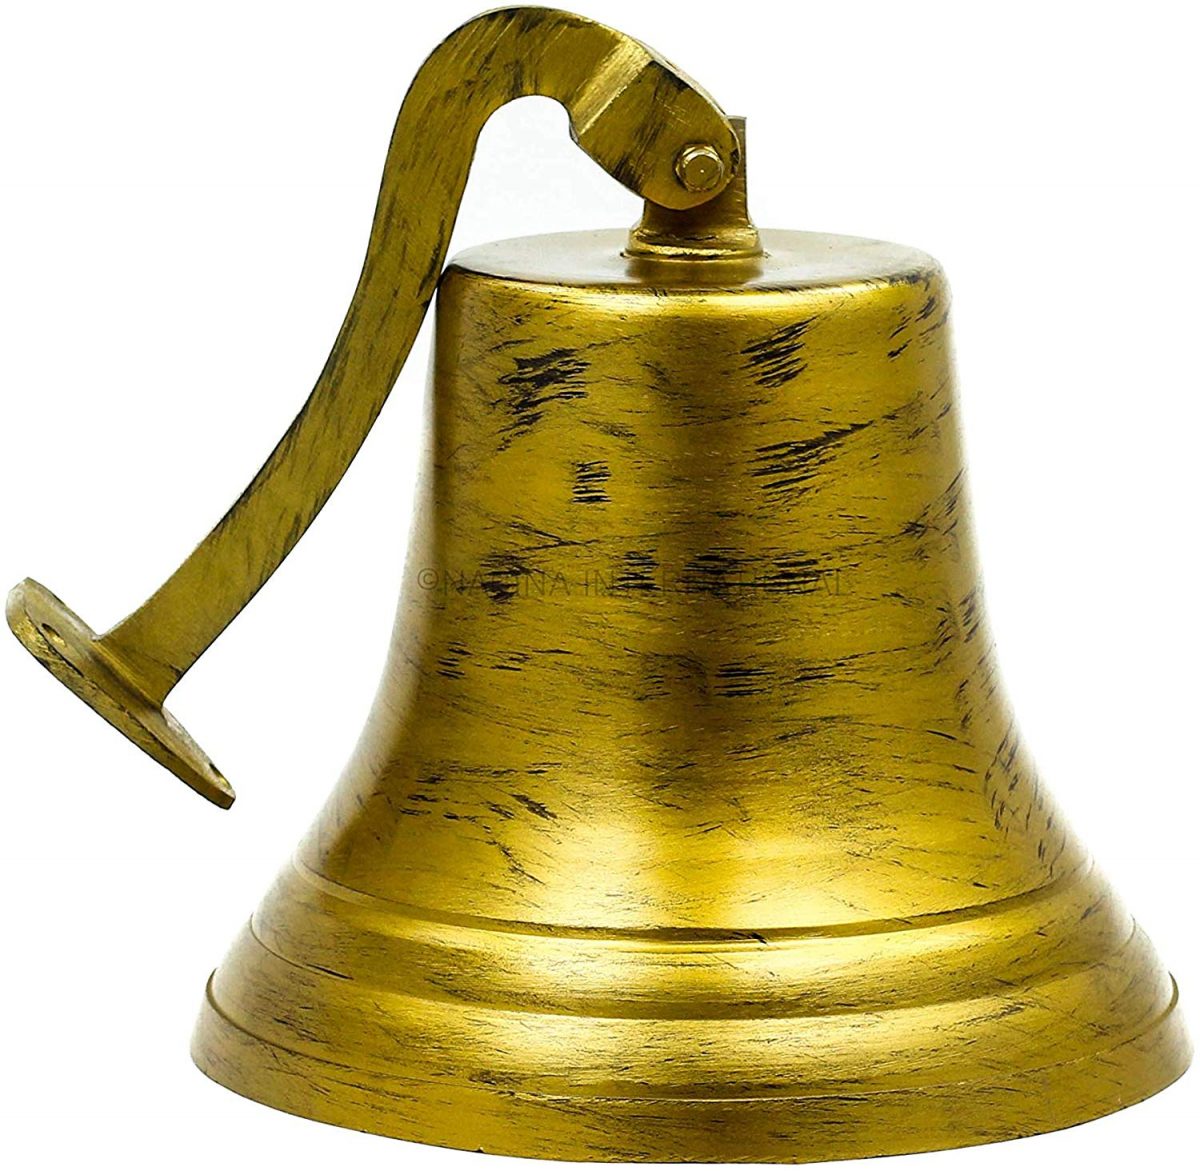 Nagina International 11" Golden Antique Brushed Brass Nautical Decorative Boat's Functional Bell with Brass Clapper | Rustic Antique Finish - Shipwrecked Bell